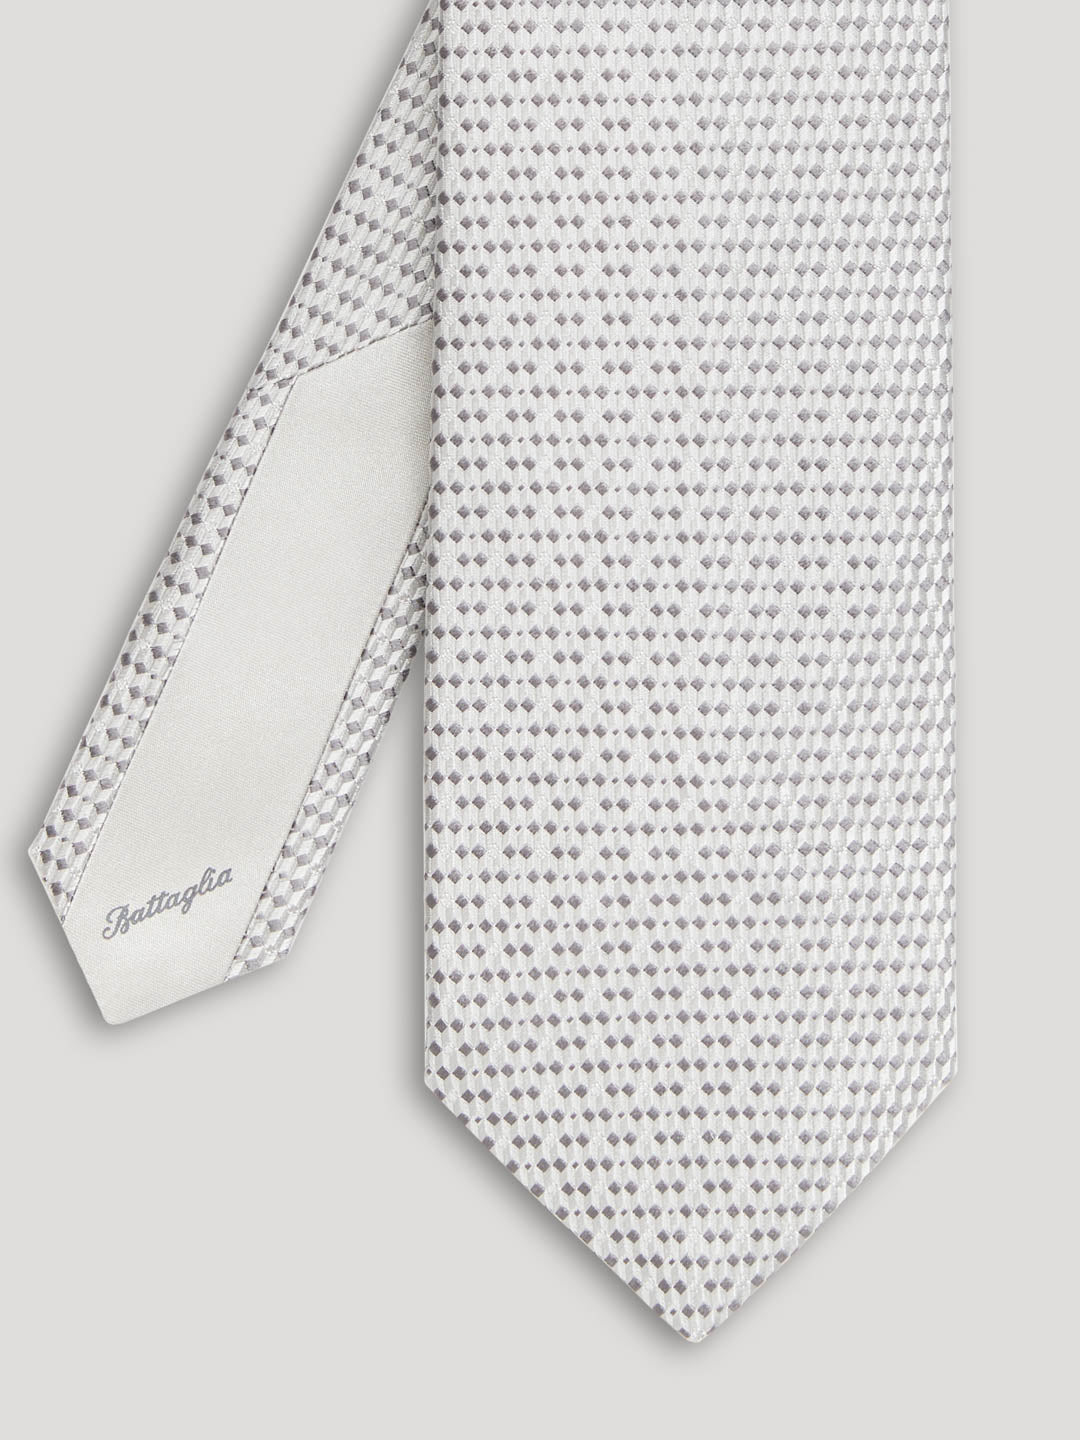 Silver tie with small grey geometric details.